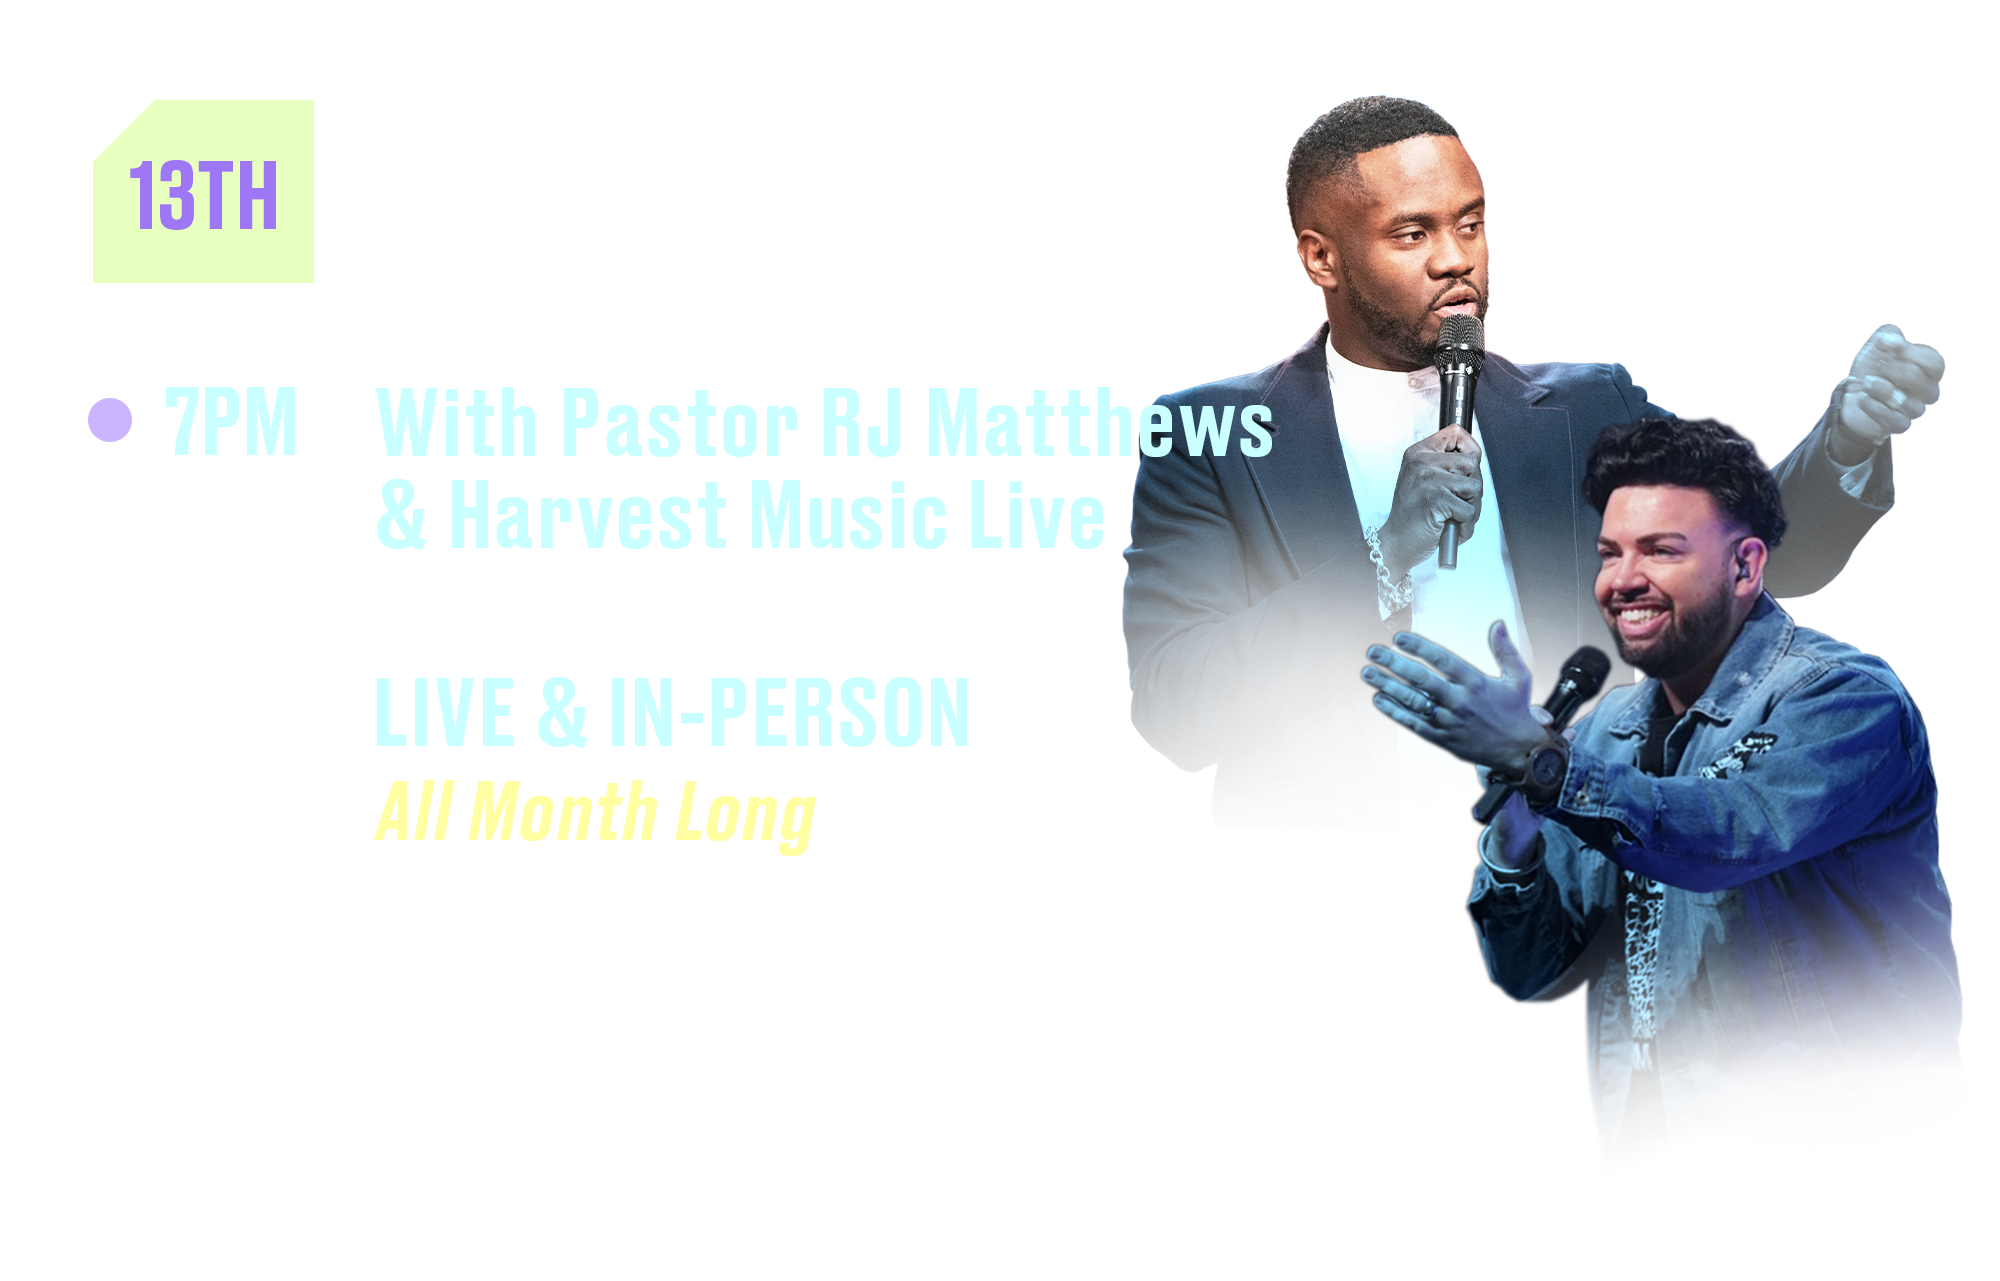 13th Outpouring Wednesdays 7PM With Pastor RJ Matthews and Harvest Music Live. Live and In-Person All Month Long